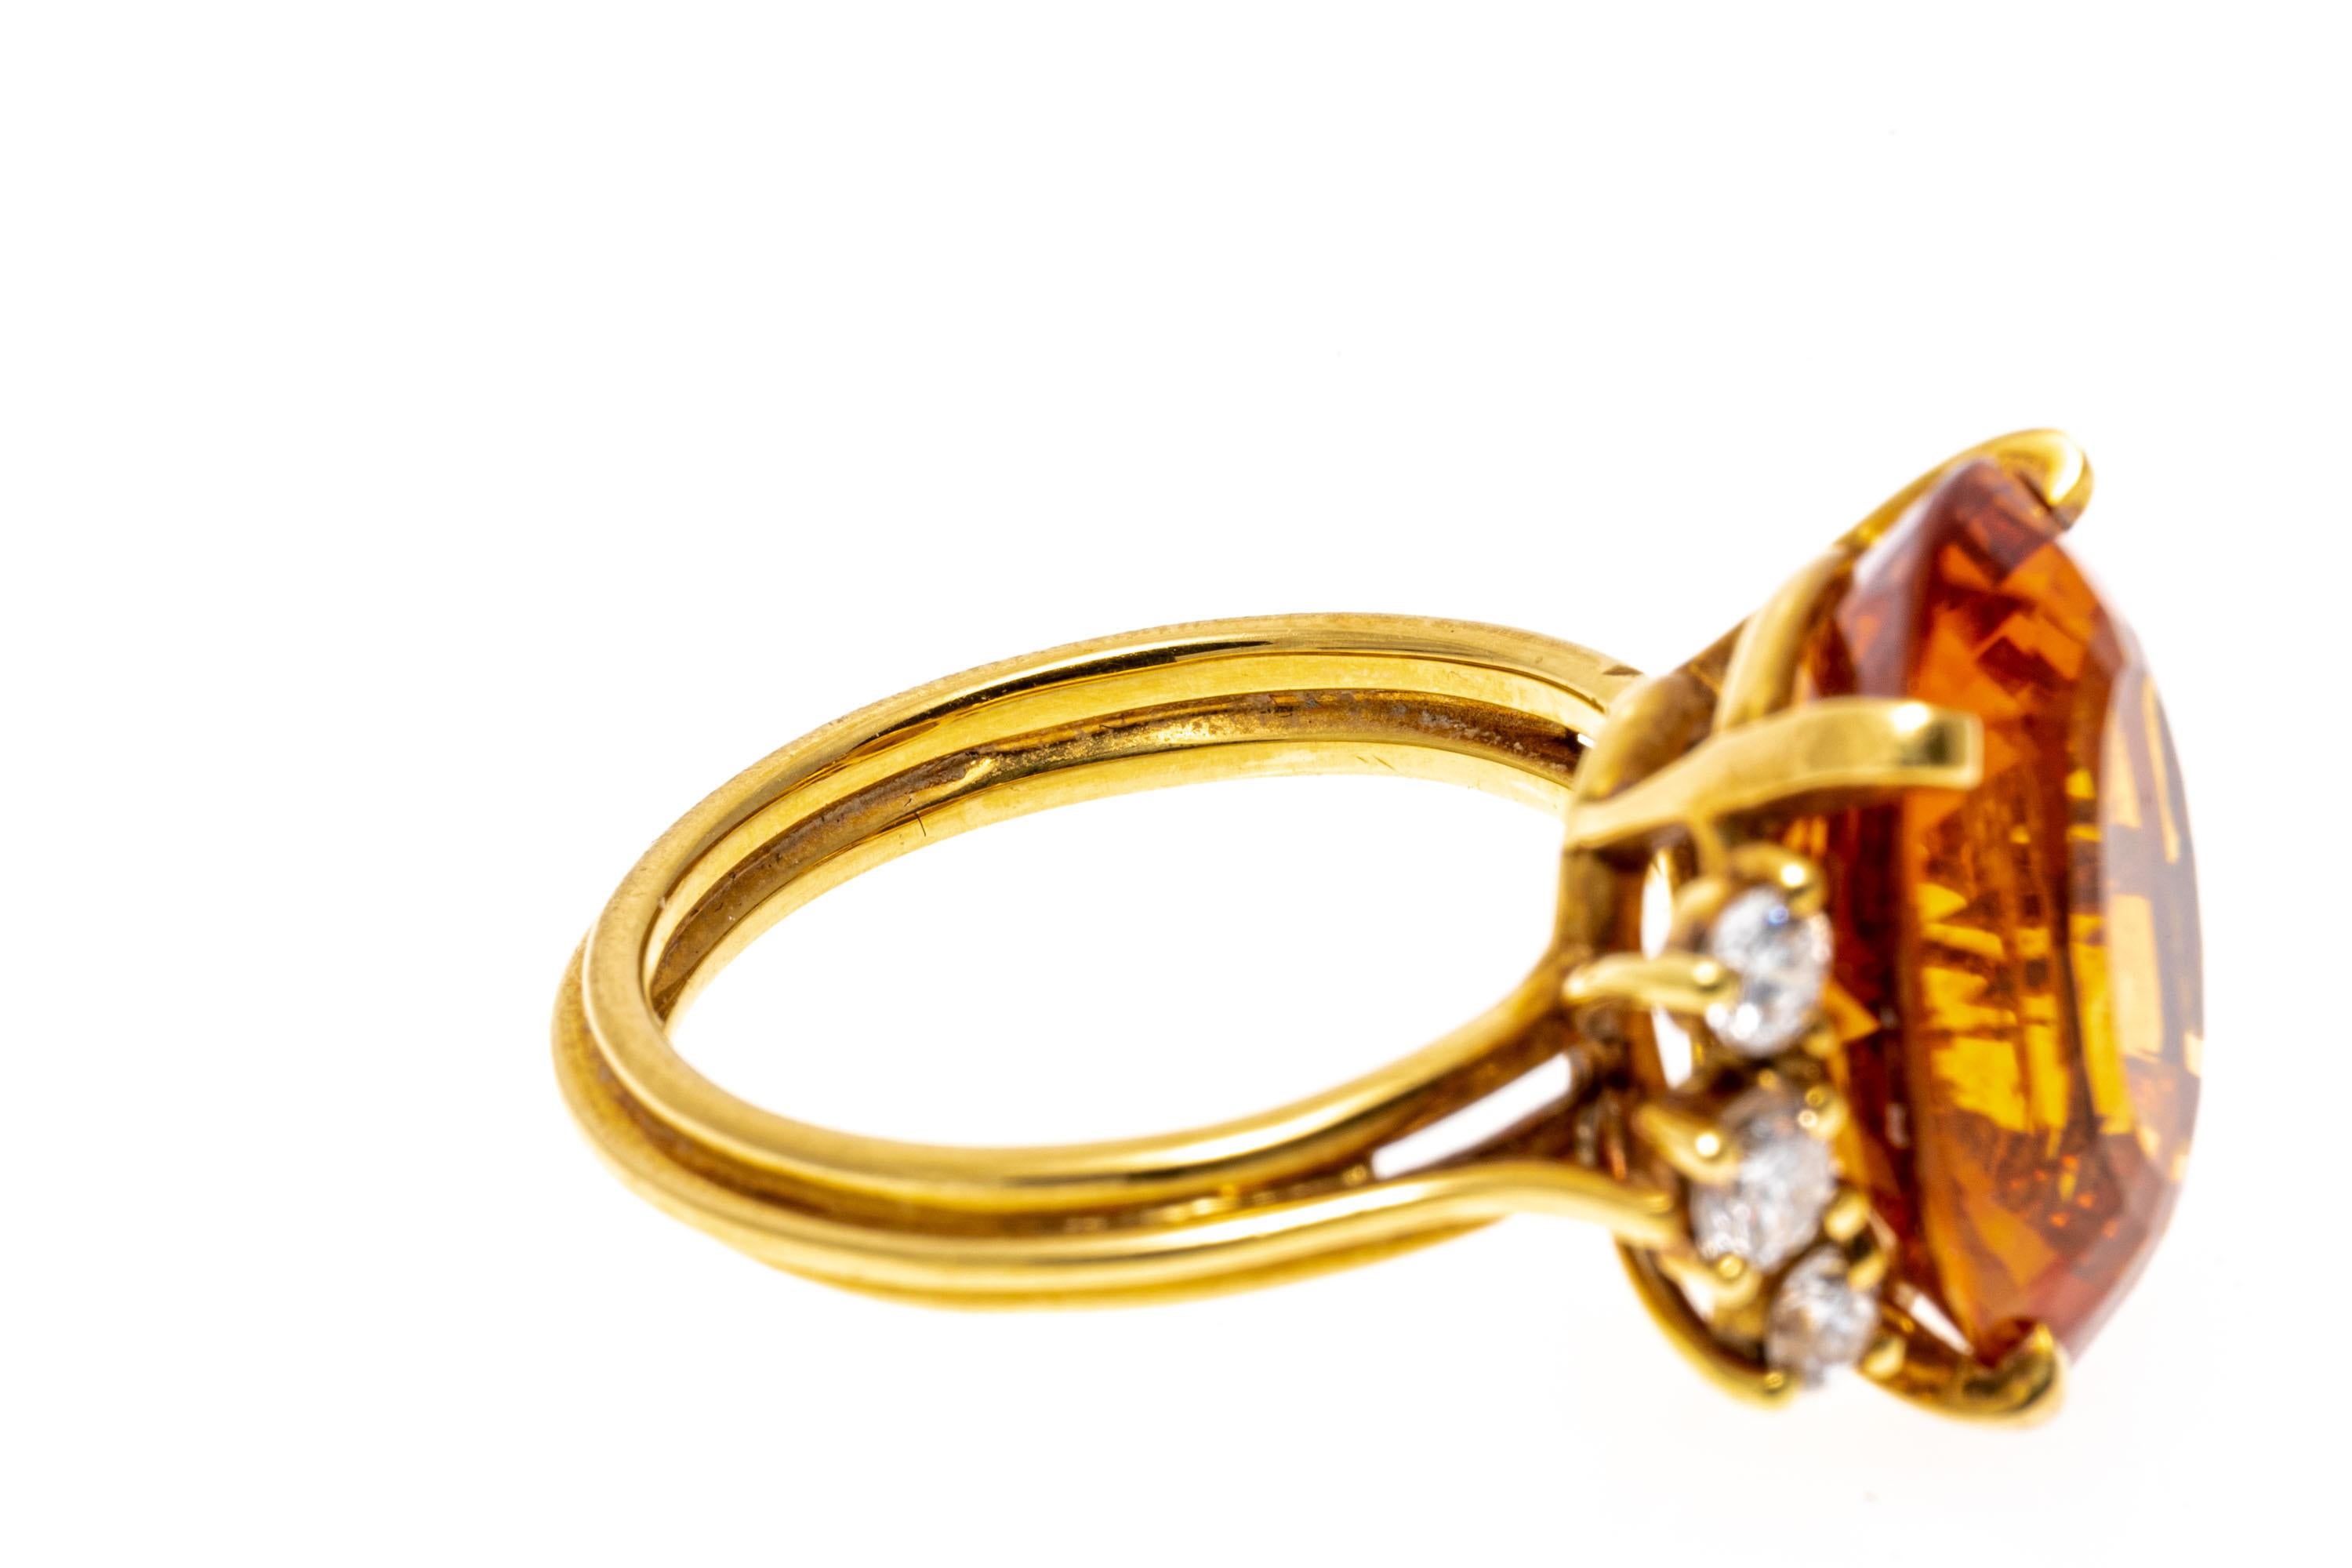 18k yellow gold ring. This delightful ring features a center oval faceted, medium to dark orange color citrine, approximately 7.96 CTS, flanked by graduated round brilliant cut diamonds, approximately 0.32 TCW, prong set. The ring is adorned by a